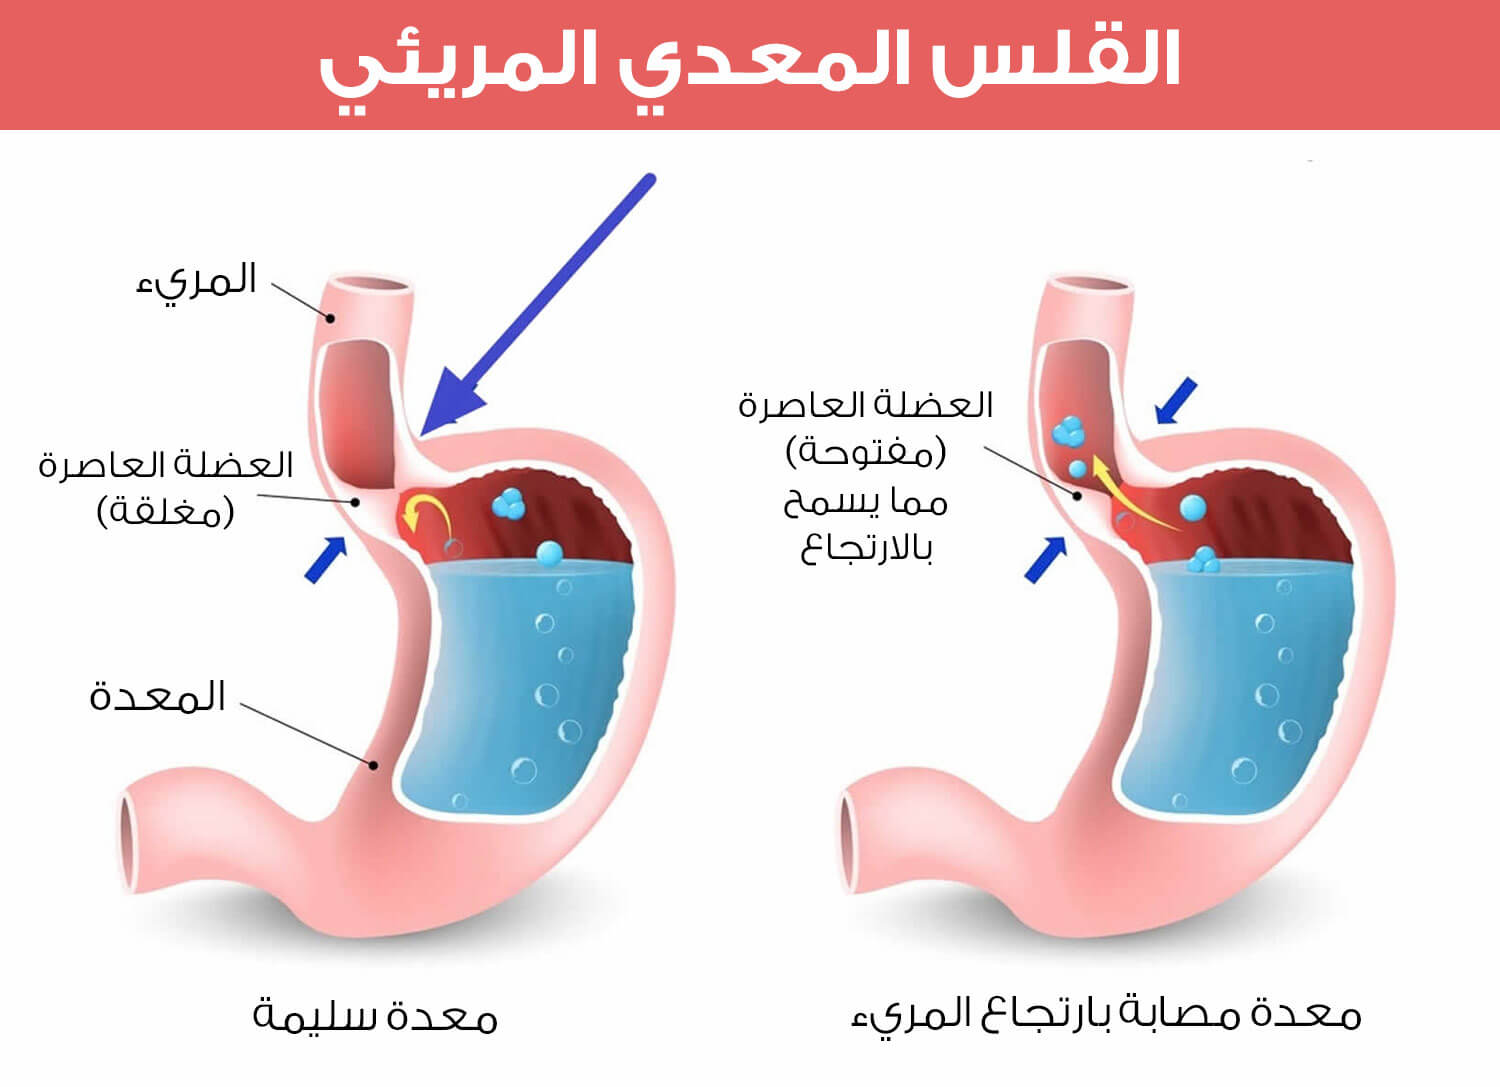 An image showing the difference between a healthy stomach and a stomach with an open sphincter, which allows reflux into the esophagus